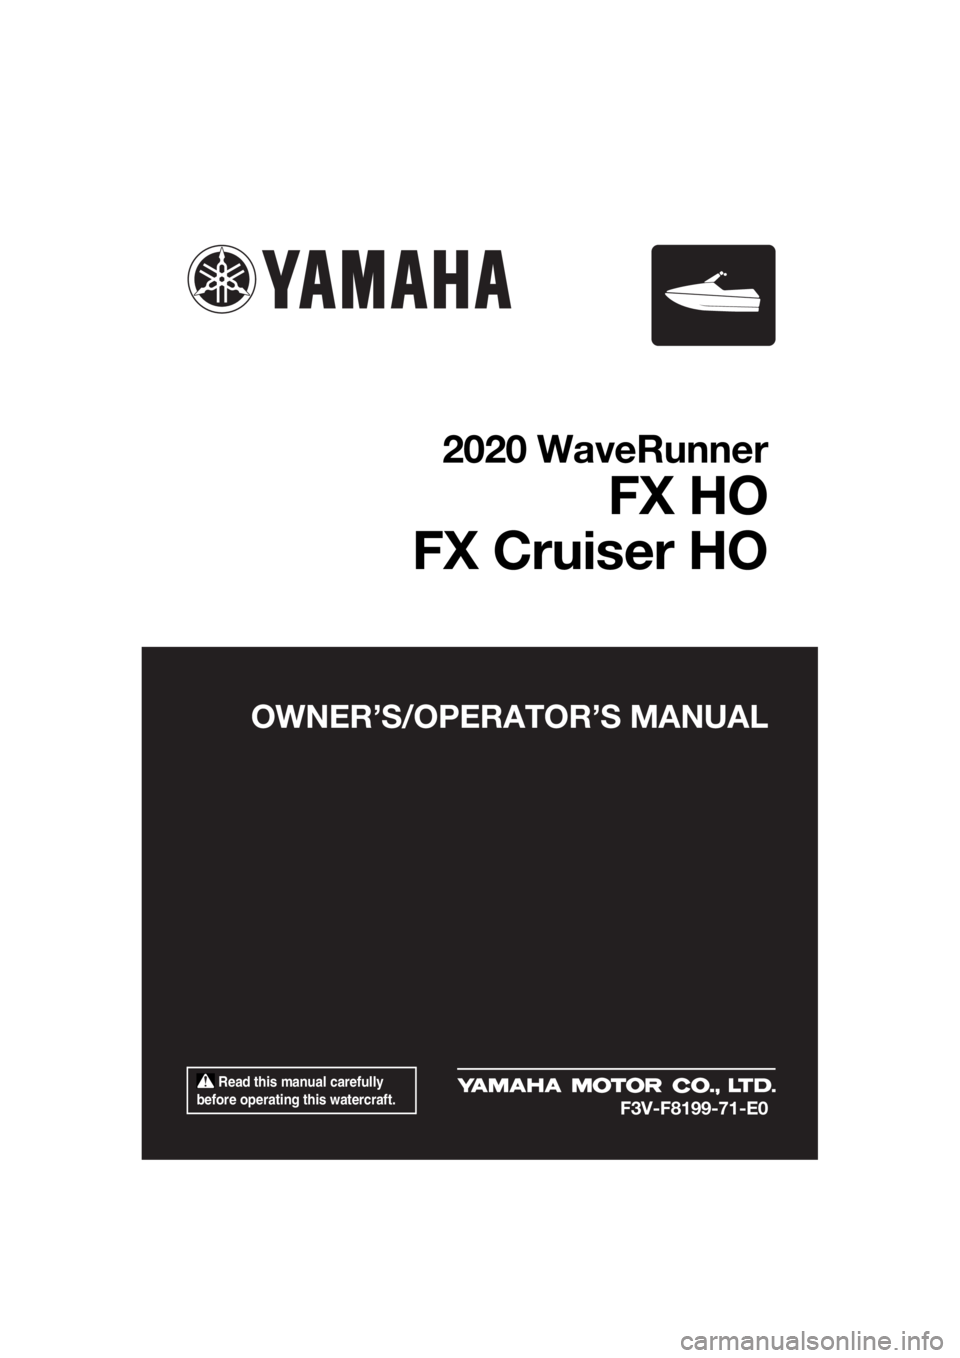 YAMAHA FX HO CRUISER 2020  Owners Manual  Read this manual carefully 
before operating this watercraft.
OWNER’S/OPERATOR’S MANUAL
2020 WaveRunner
FX HO
FX Cruiser HO
F3V-F8199-71-E0
UF3V71E0.book  Page 1  Tuesday, June 25, 2019  9:14 AM 